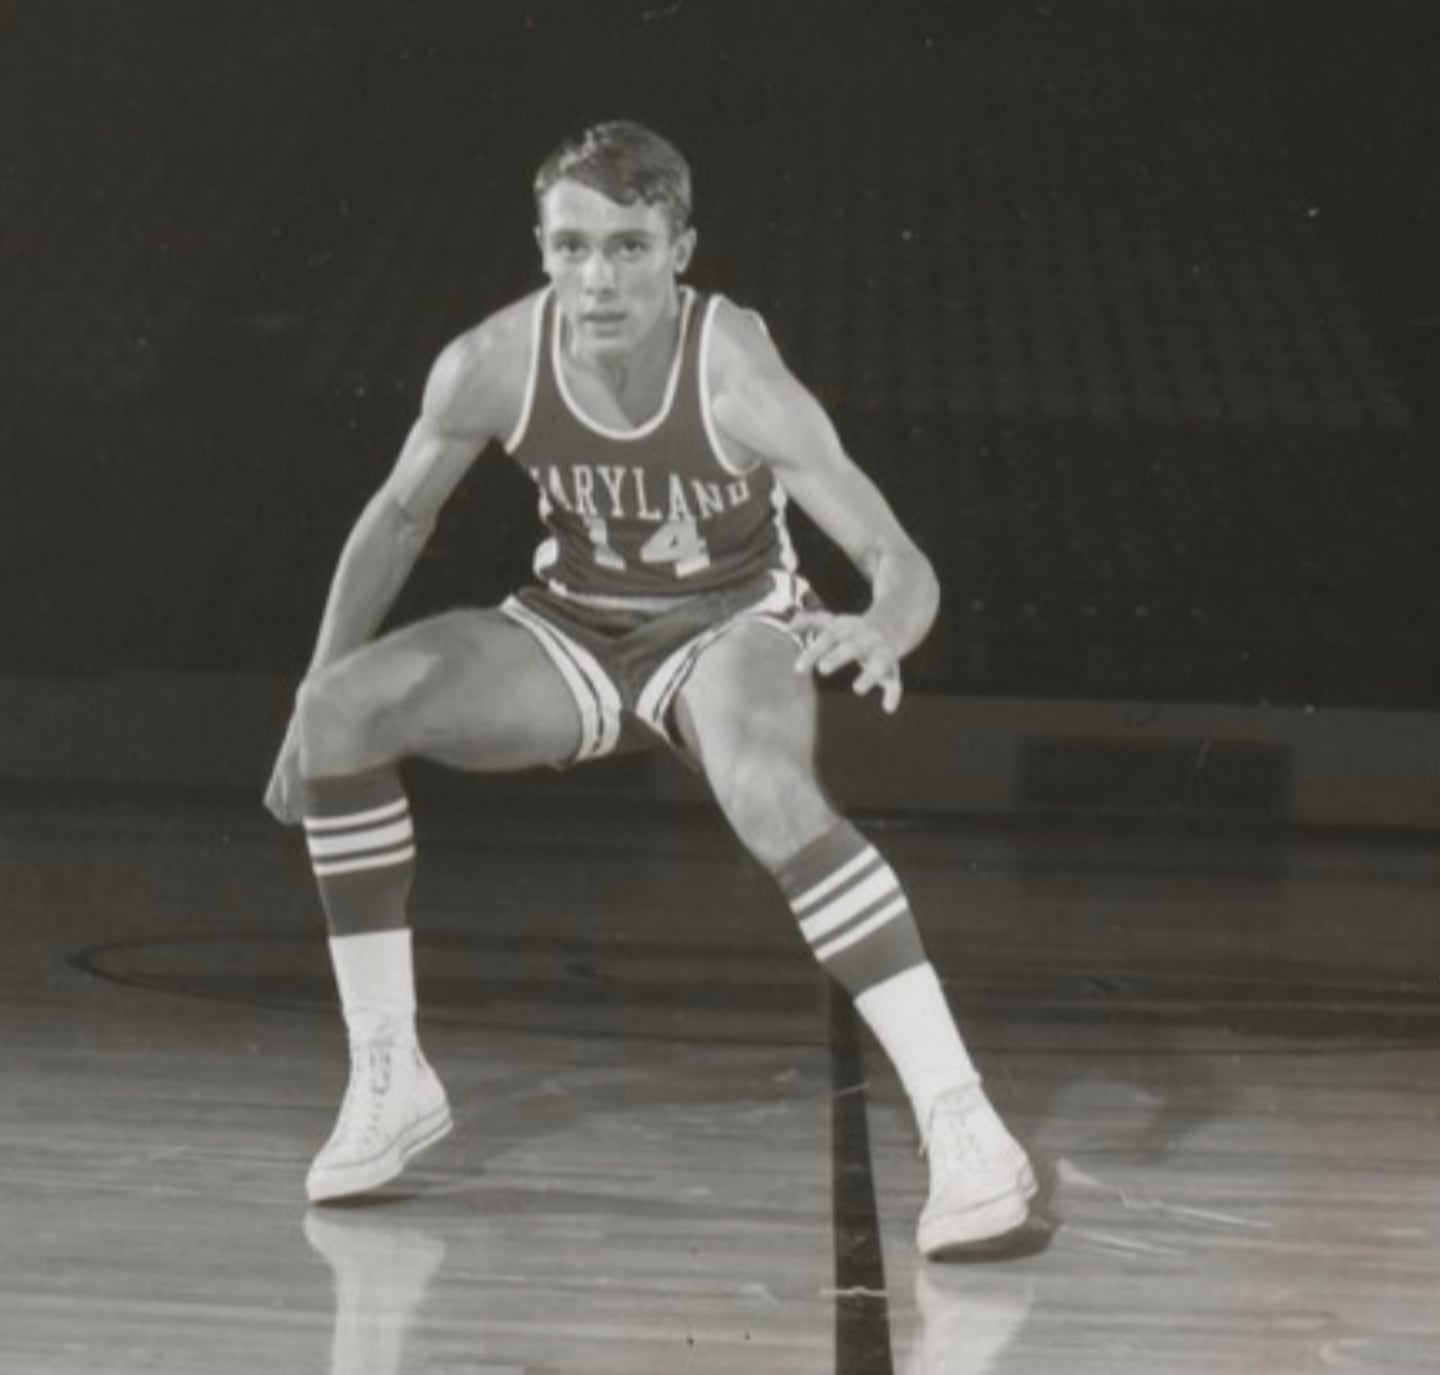 Gary Williams was a point guard for the Maryland Terrapins in the 1960s before he returned to be their head coach, ultimately leading Maryland to its first NCAA men's basketball title.